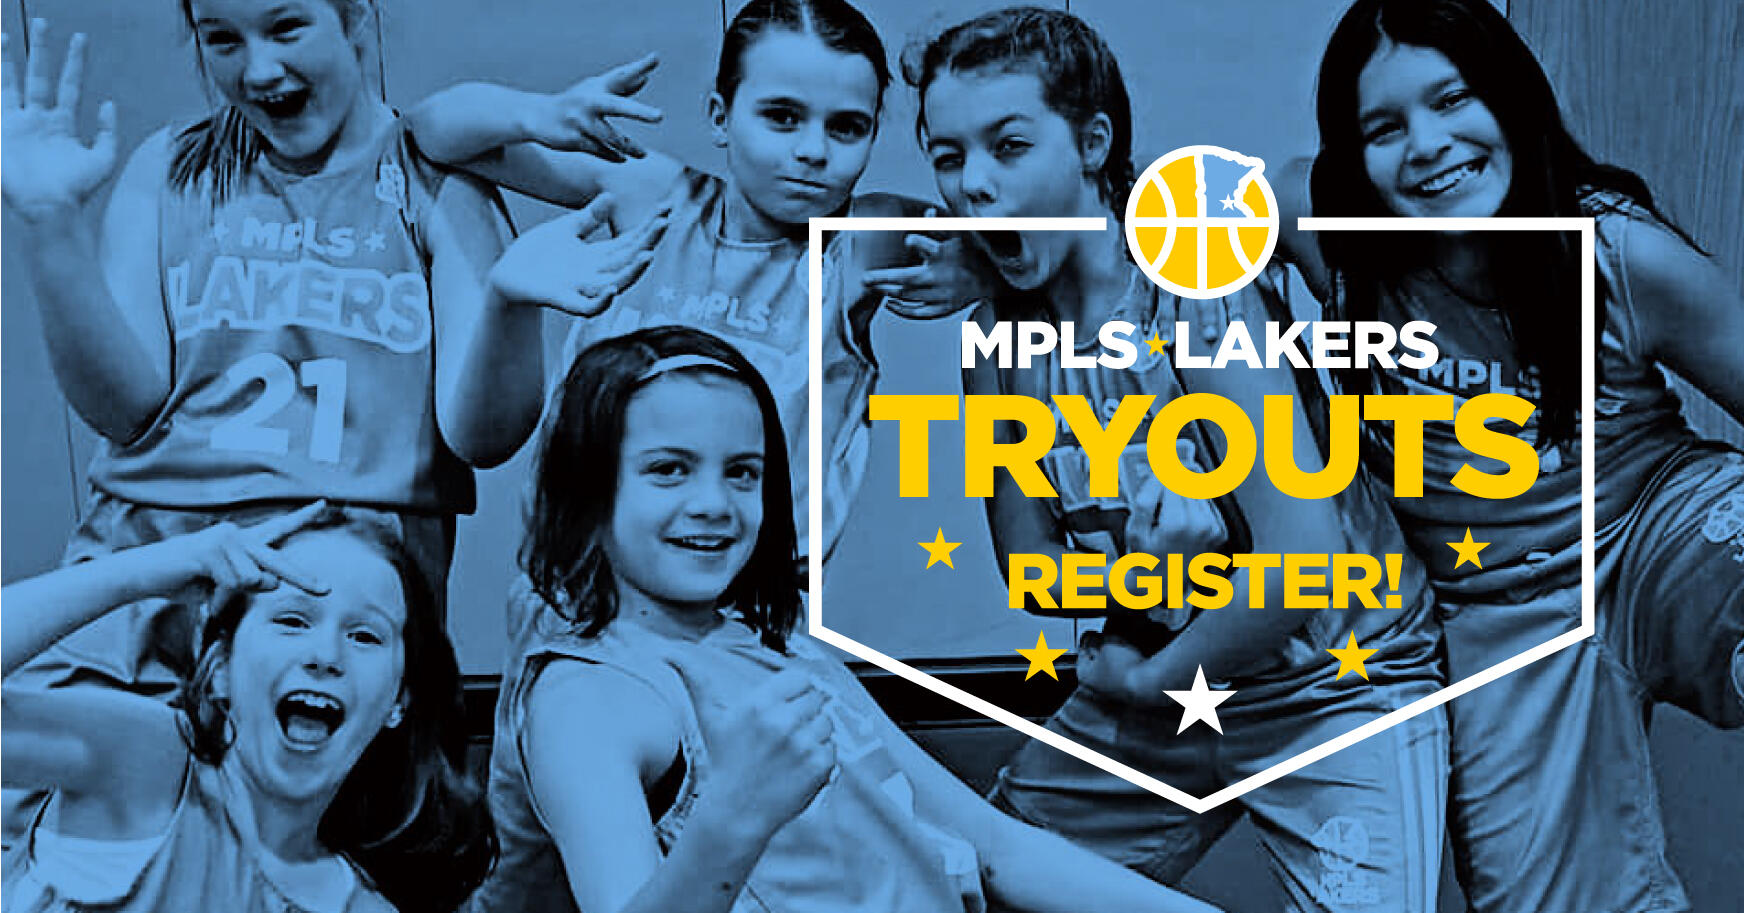 Minneapolis Lakers Youth Basketball